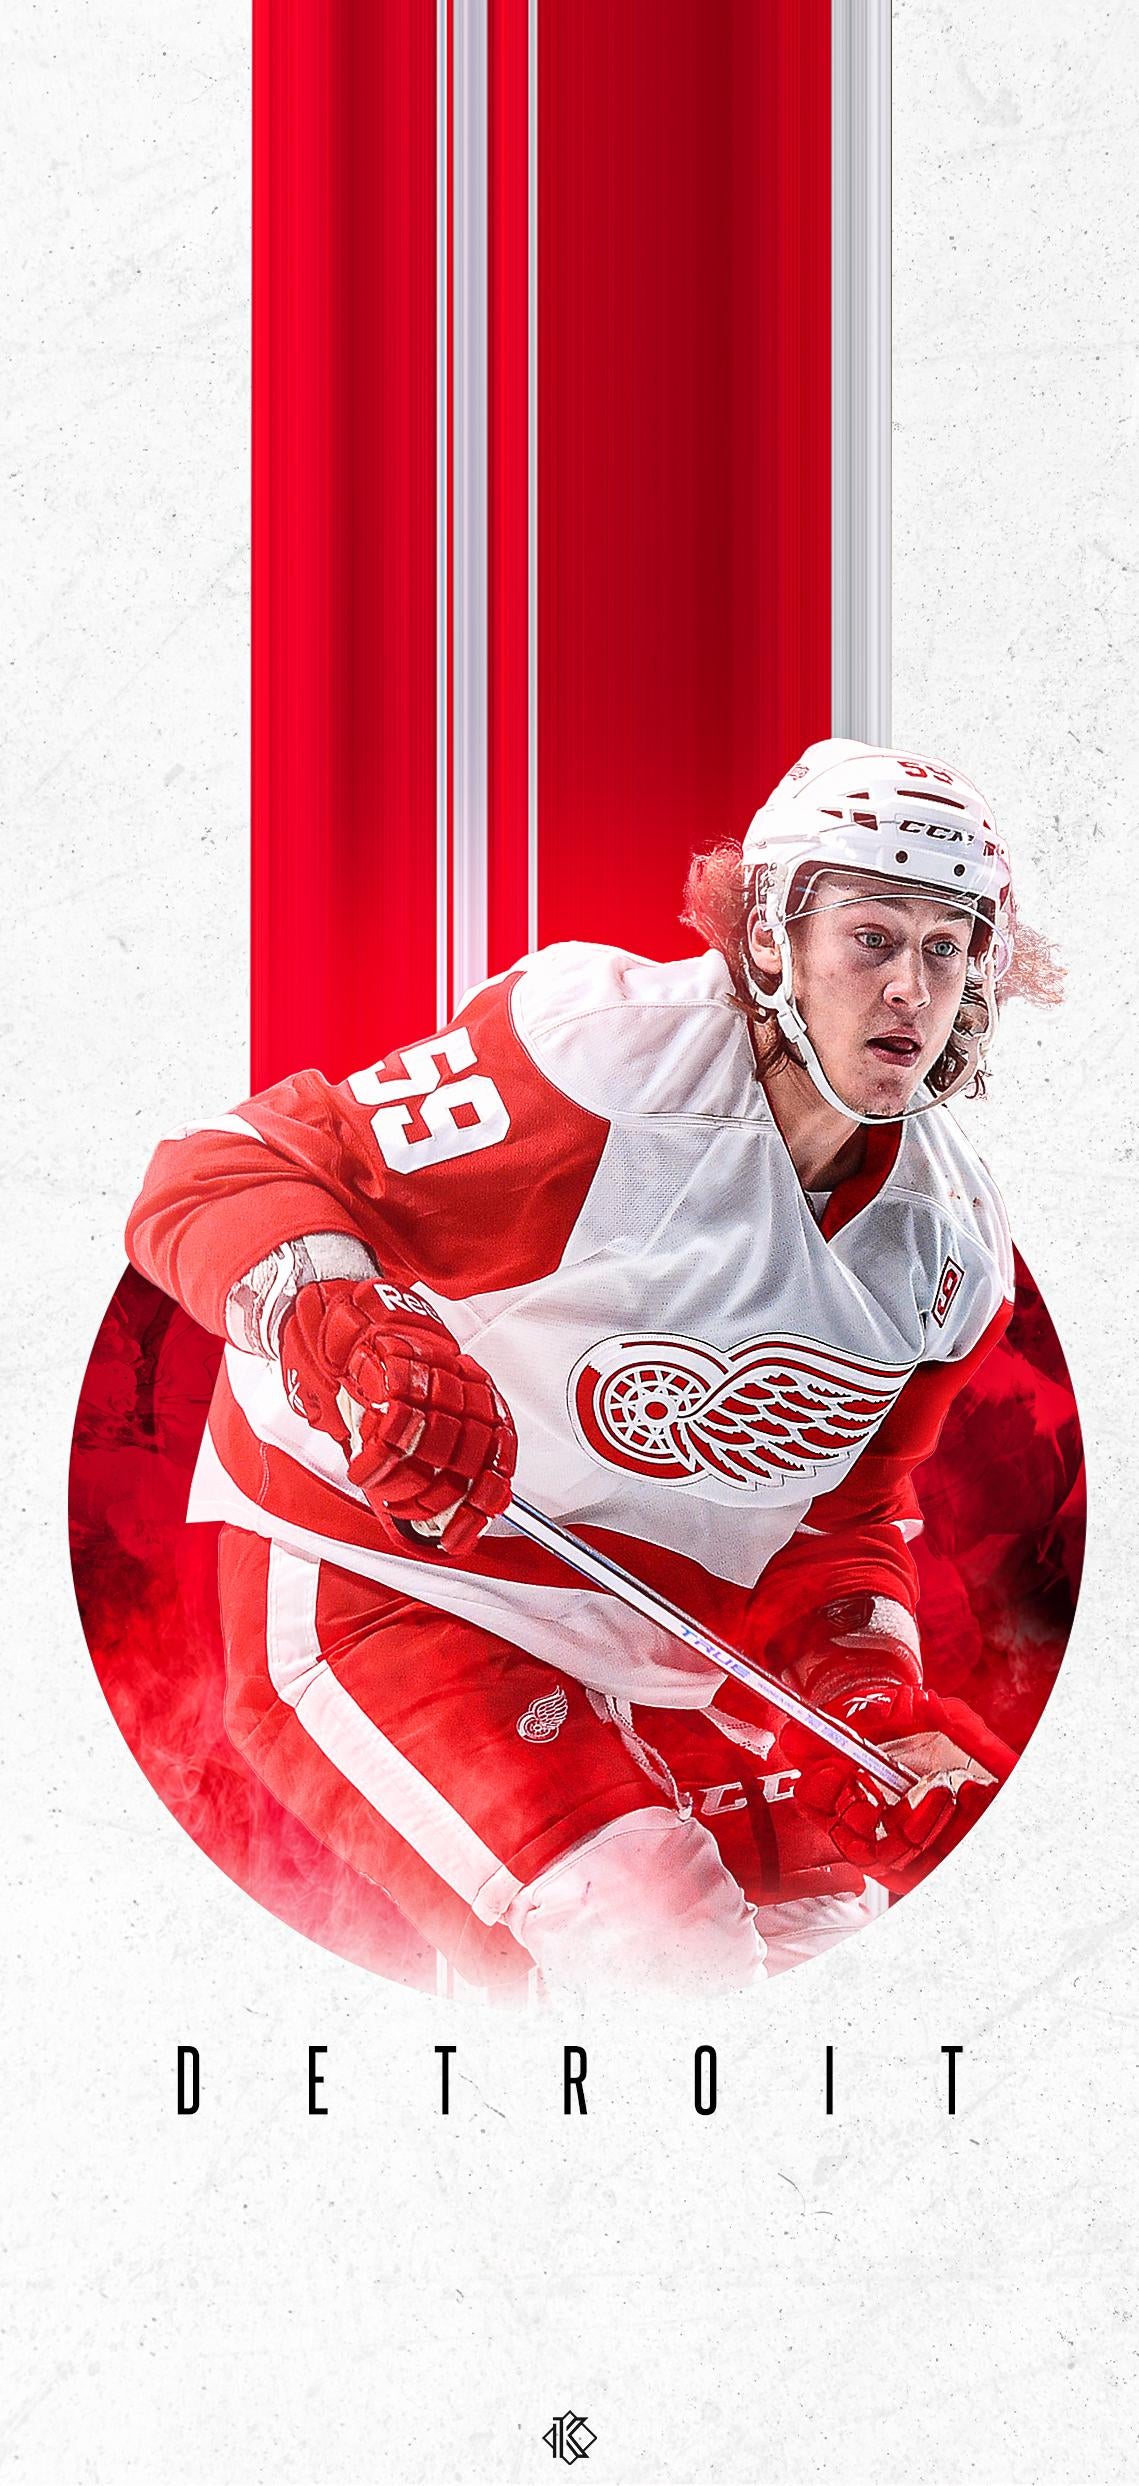 Made a Red Wings phone wallpaper through each team and doing one player per team in this style! Hope you enjoy!